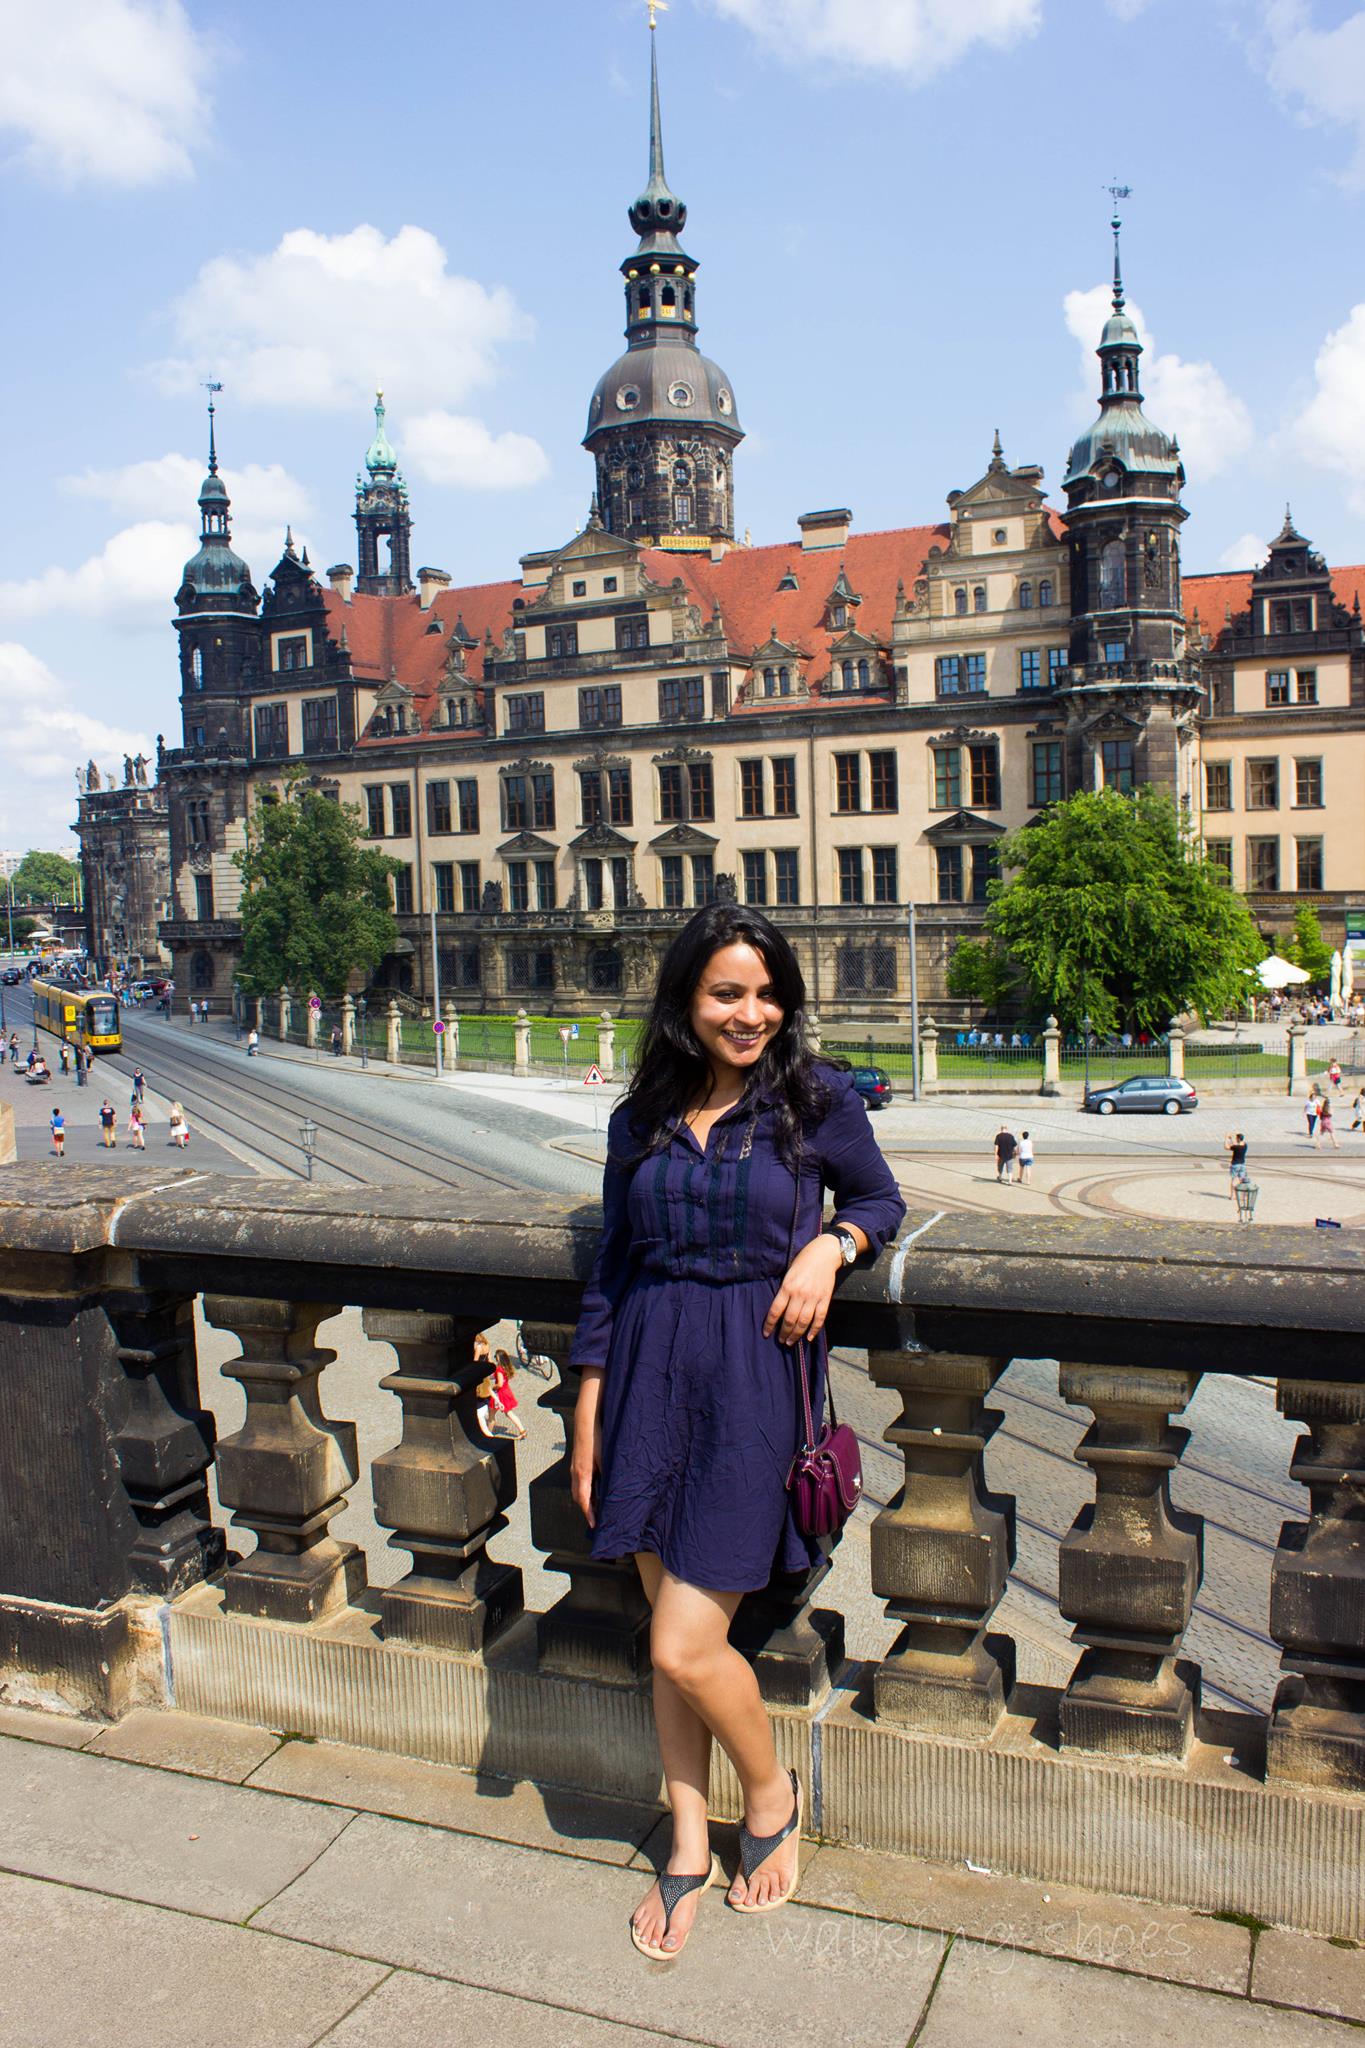 In Pictures: Dresden, Germany - Miss Walking Shoes Travel Blog